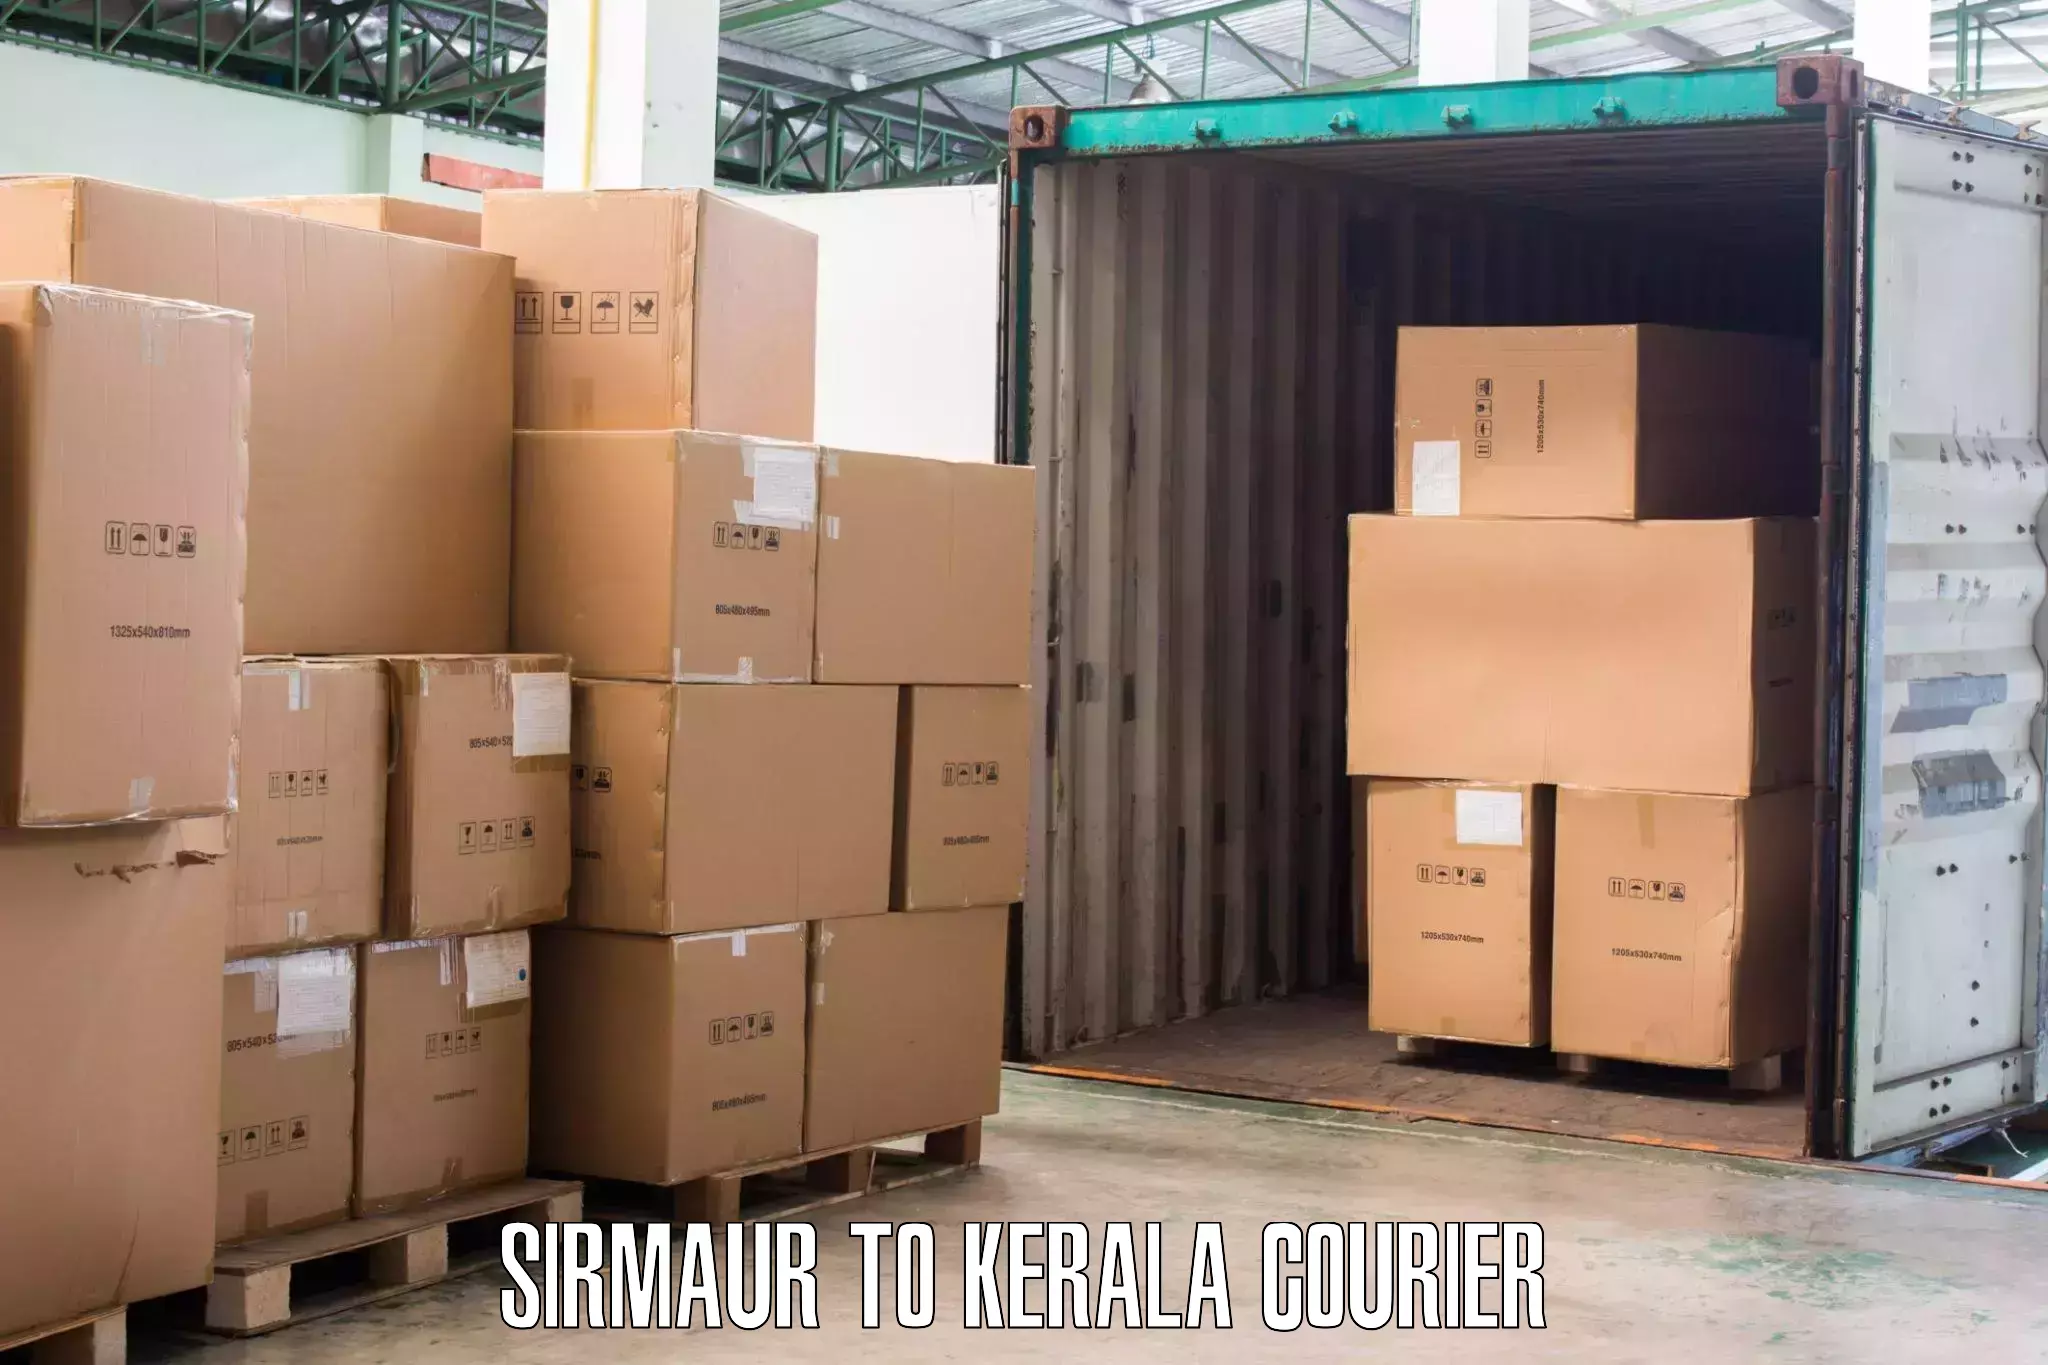 Furniture relocation experts Sirmaur to Kochi